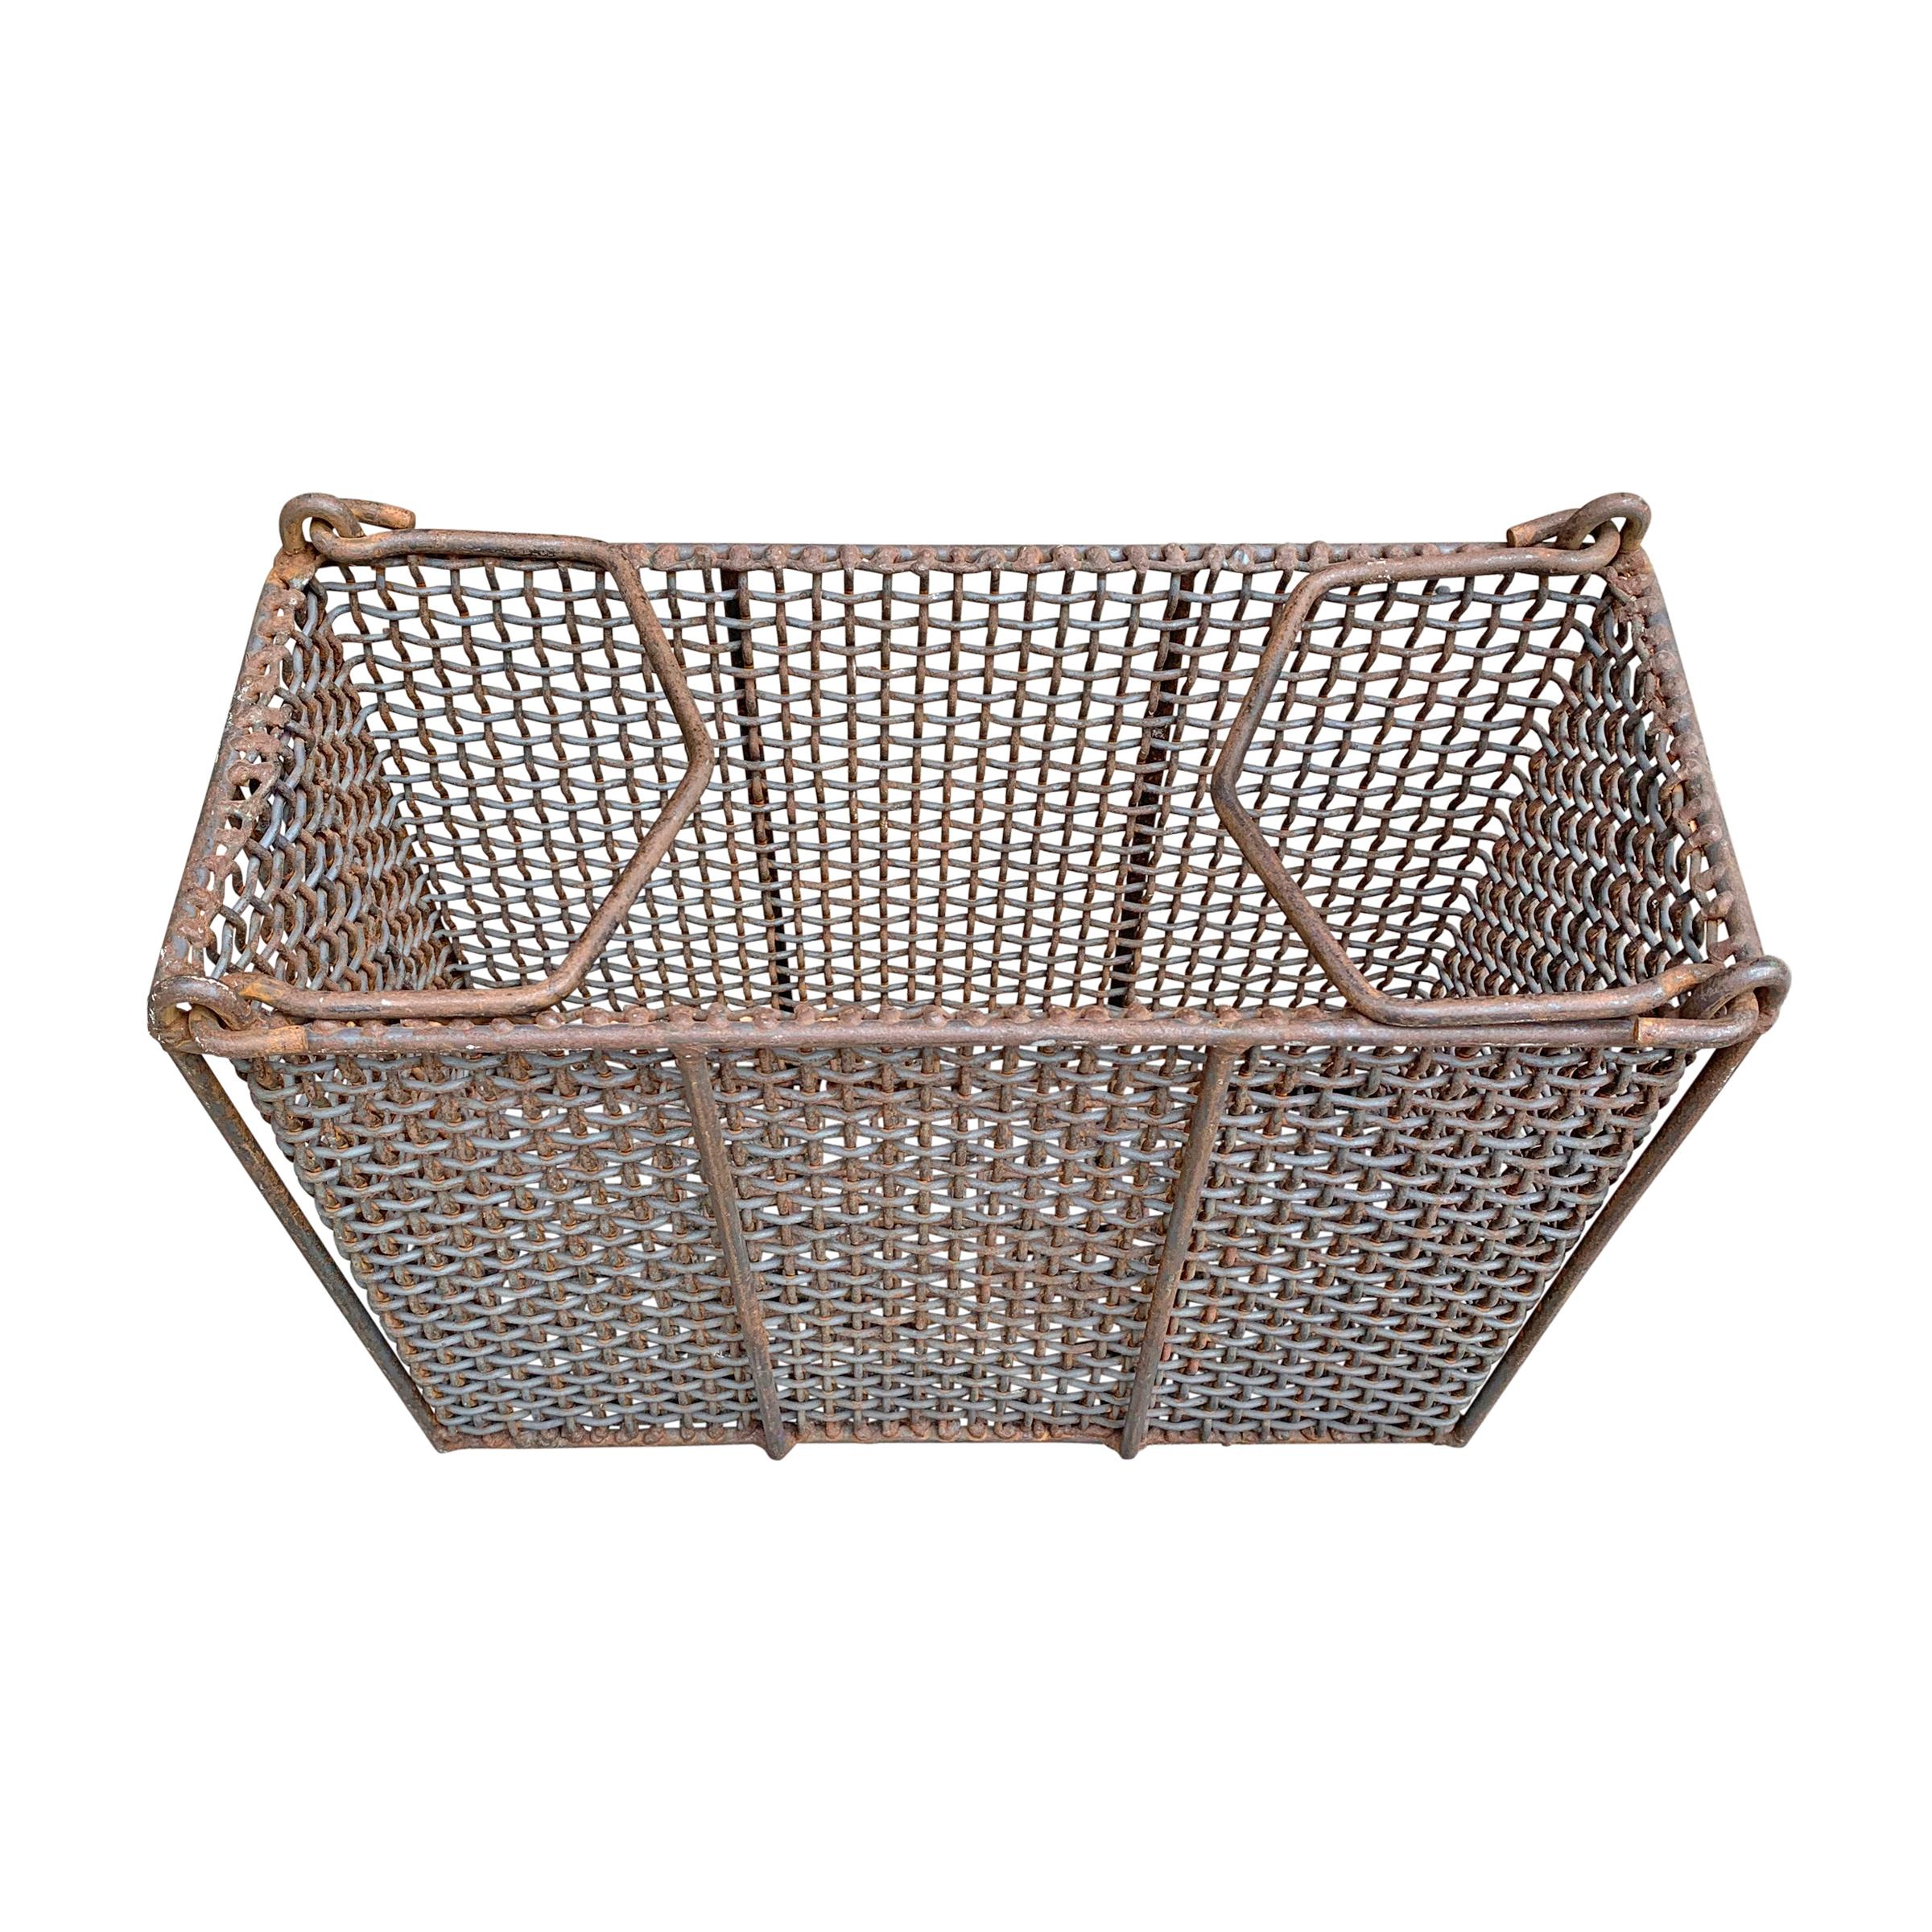 A fantastic early 20th century American Industrial woven wire basket with two handles that fold in or out. Such a cool form and perfect for use as a waste paper basket that requires a narrow space.